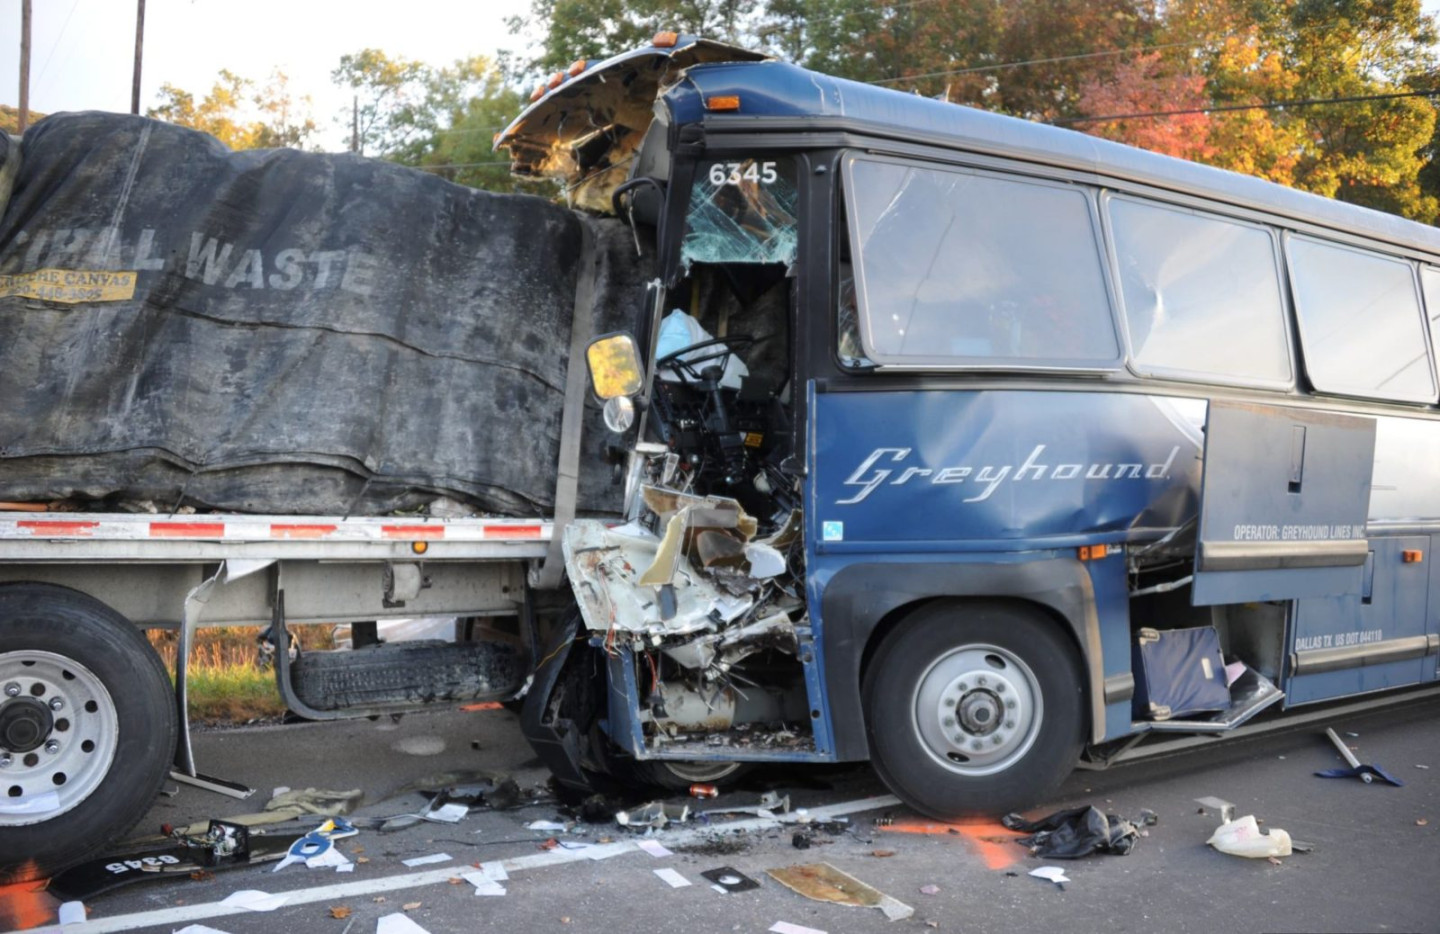 dallas bus accident lawyer